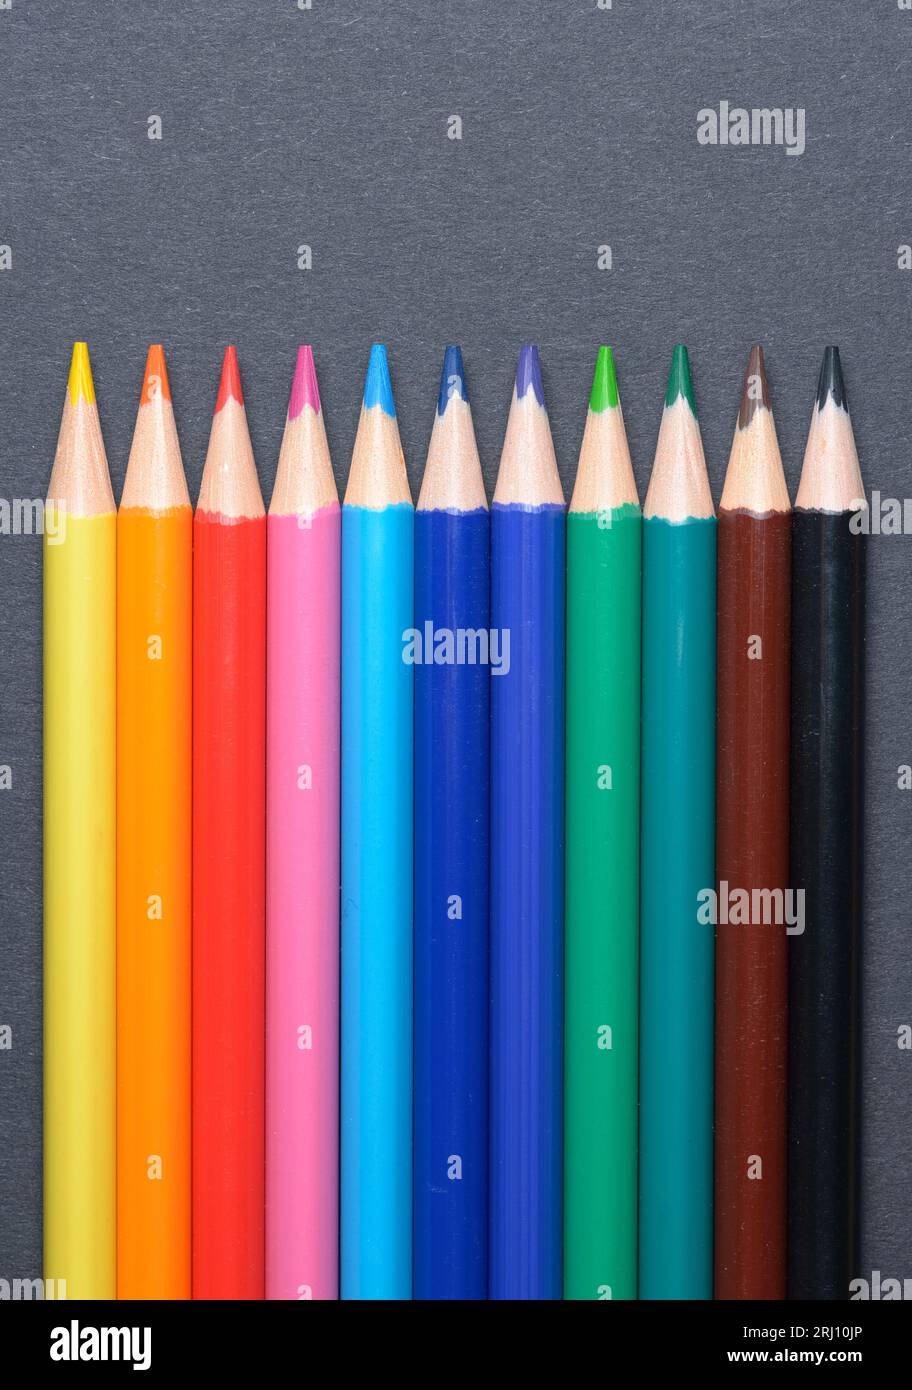 Rainbowcolored Pencil Crayons Sketch Flowers On White Paper Stock